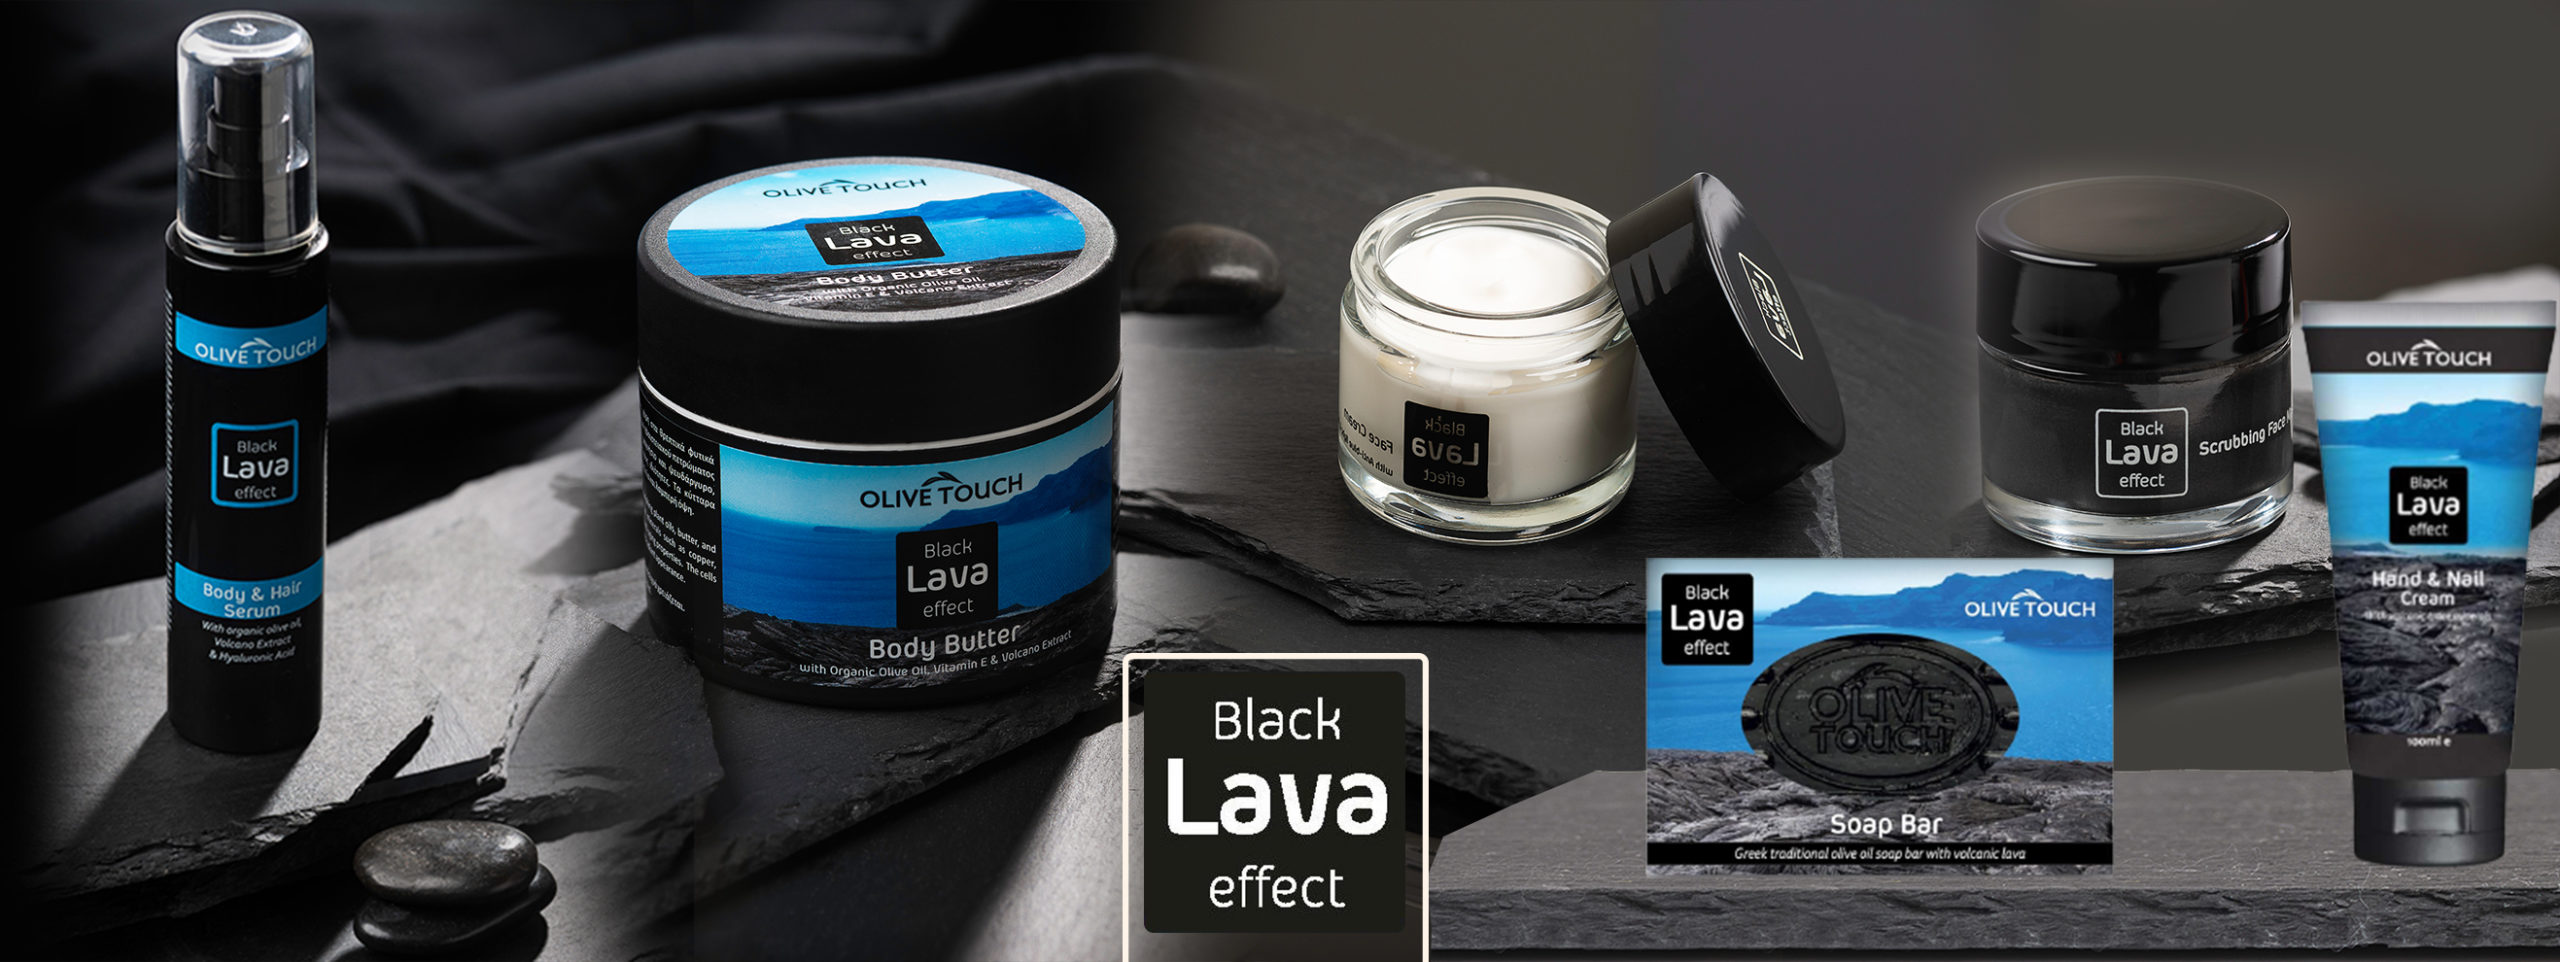 greek cosmetics with olive oil - cosmetics with volcanic lavagreek cosmetics with olive oil - cosmetics with volcanic lava